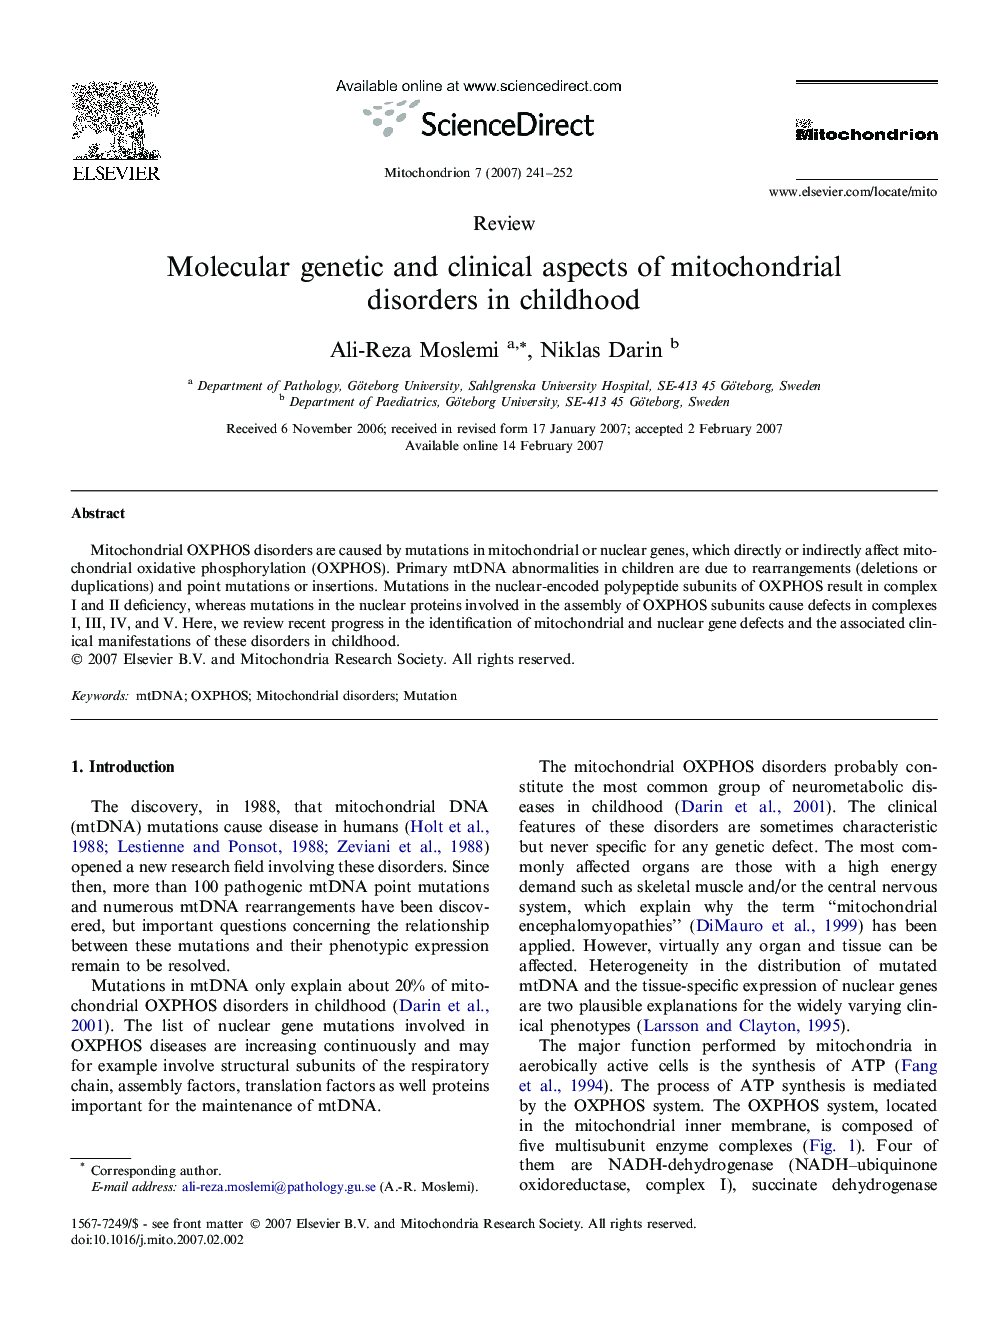 Molecular genetic and clinical aspects of mitochondrial disorders in childhood